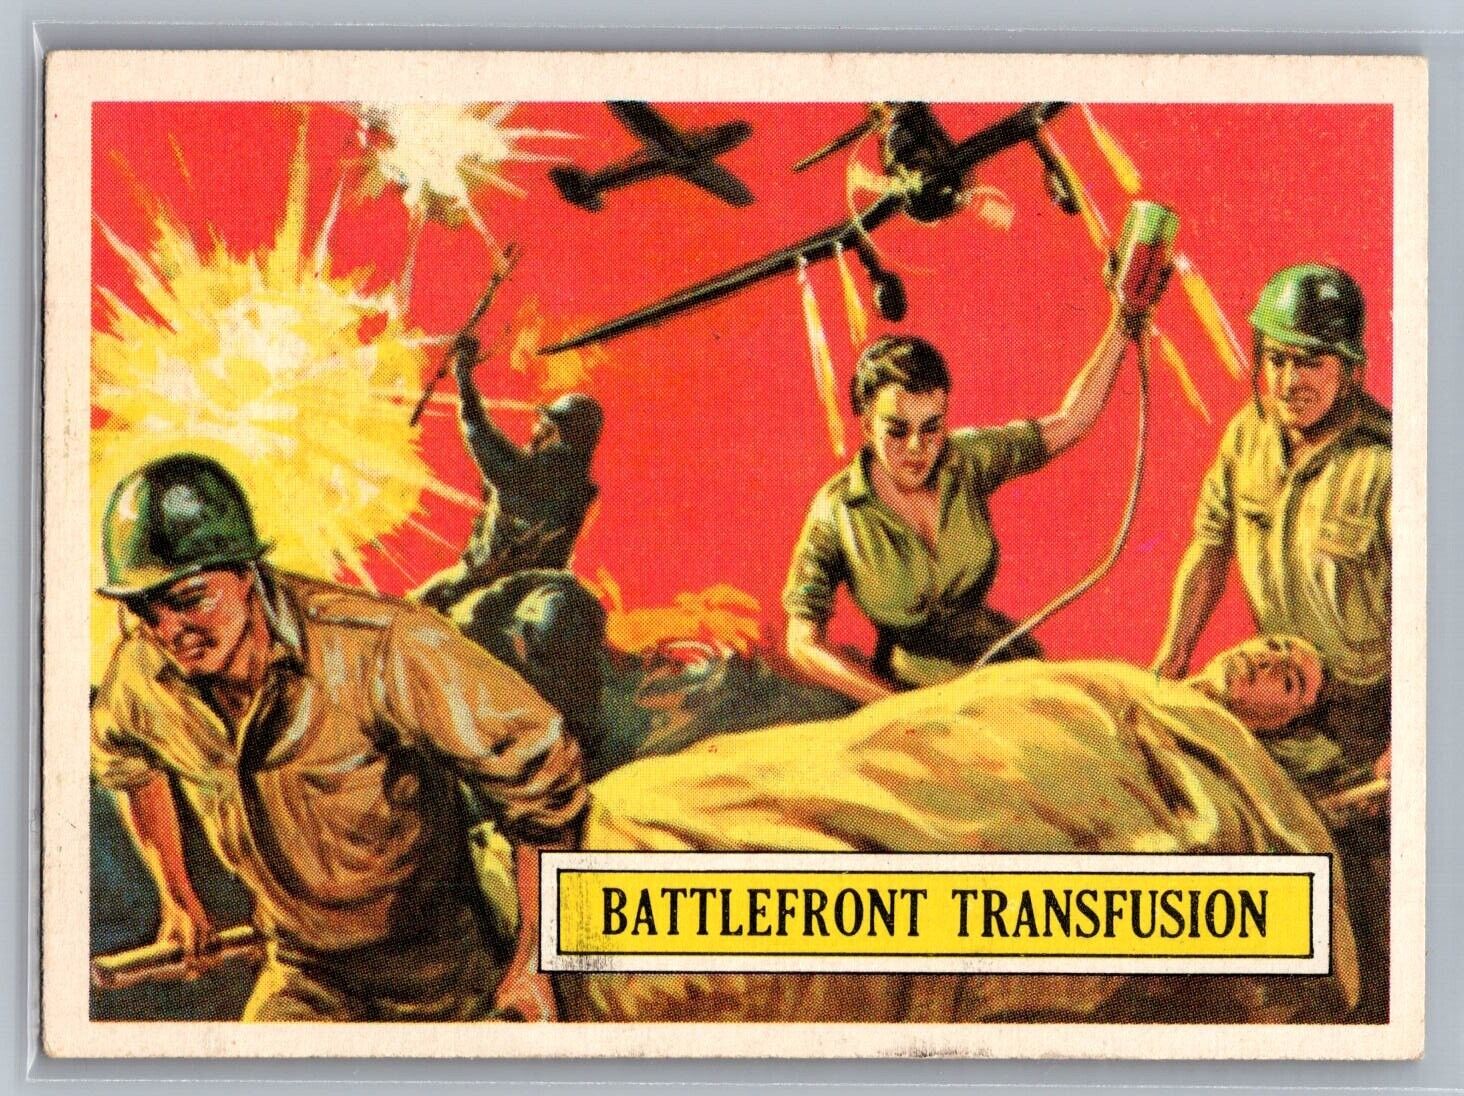 1965-TOPPS-BATTLE CARD#31 - BATTLEFRONT TRANSFUSION  -EX/NM